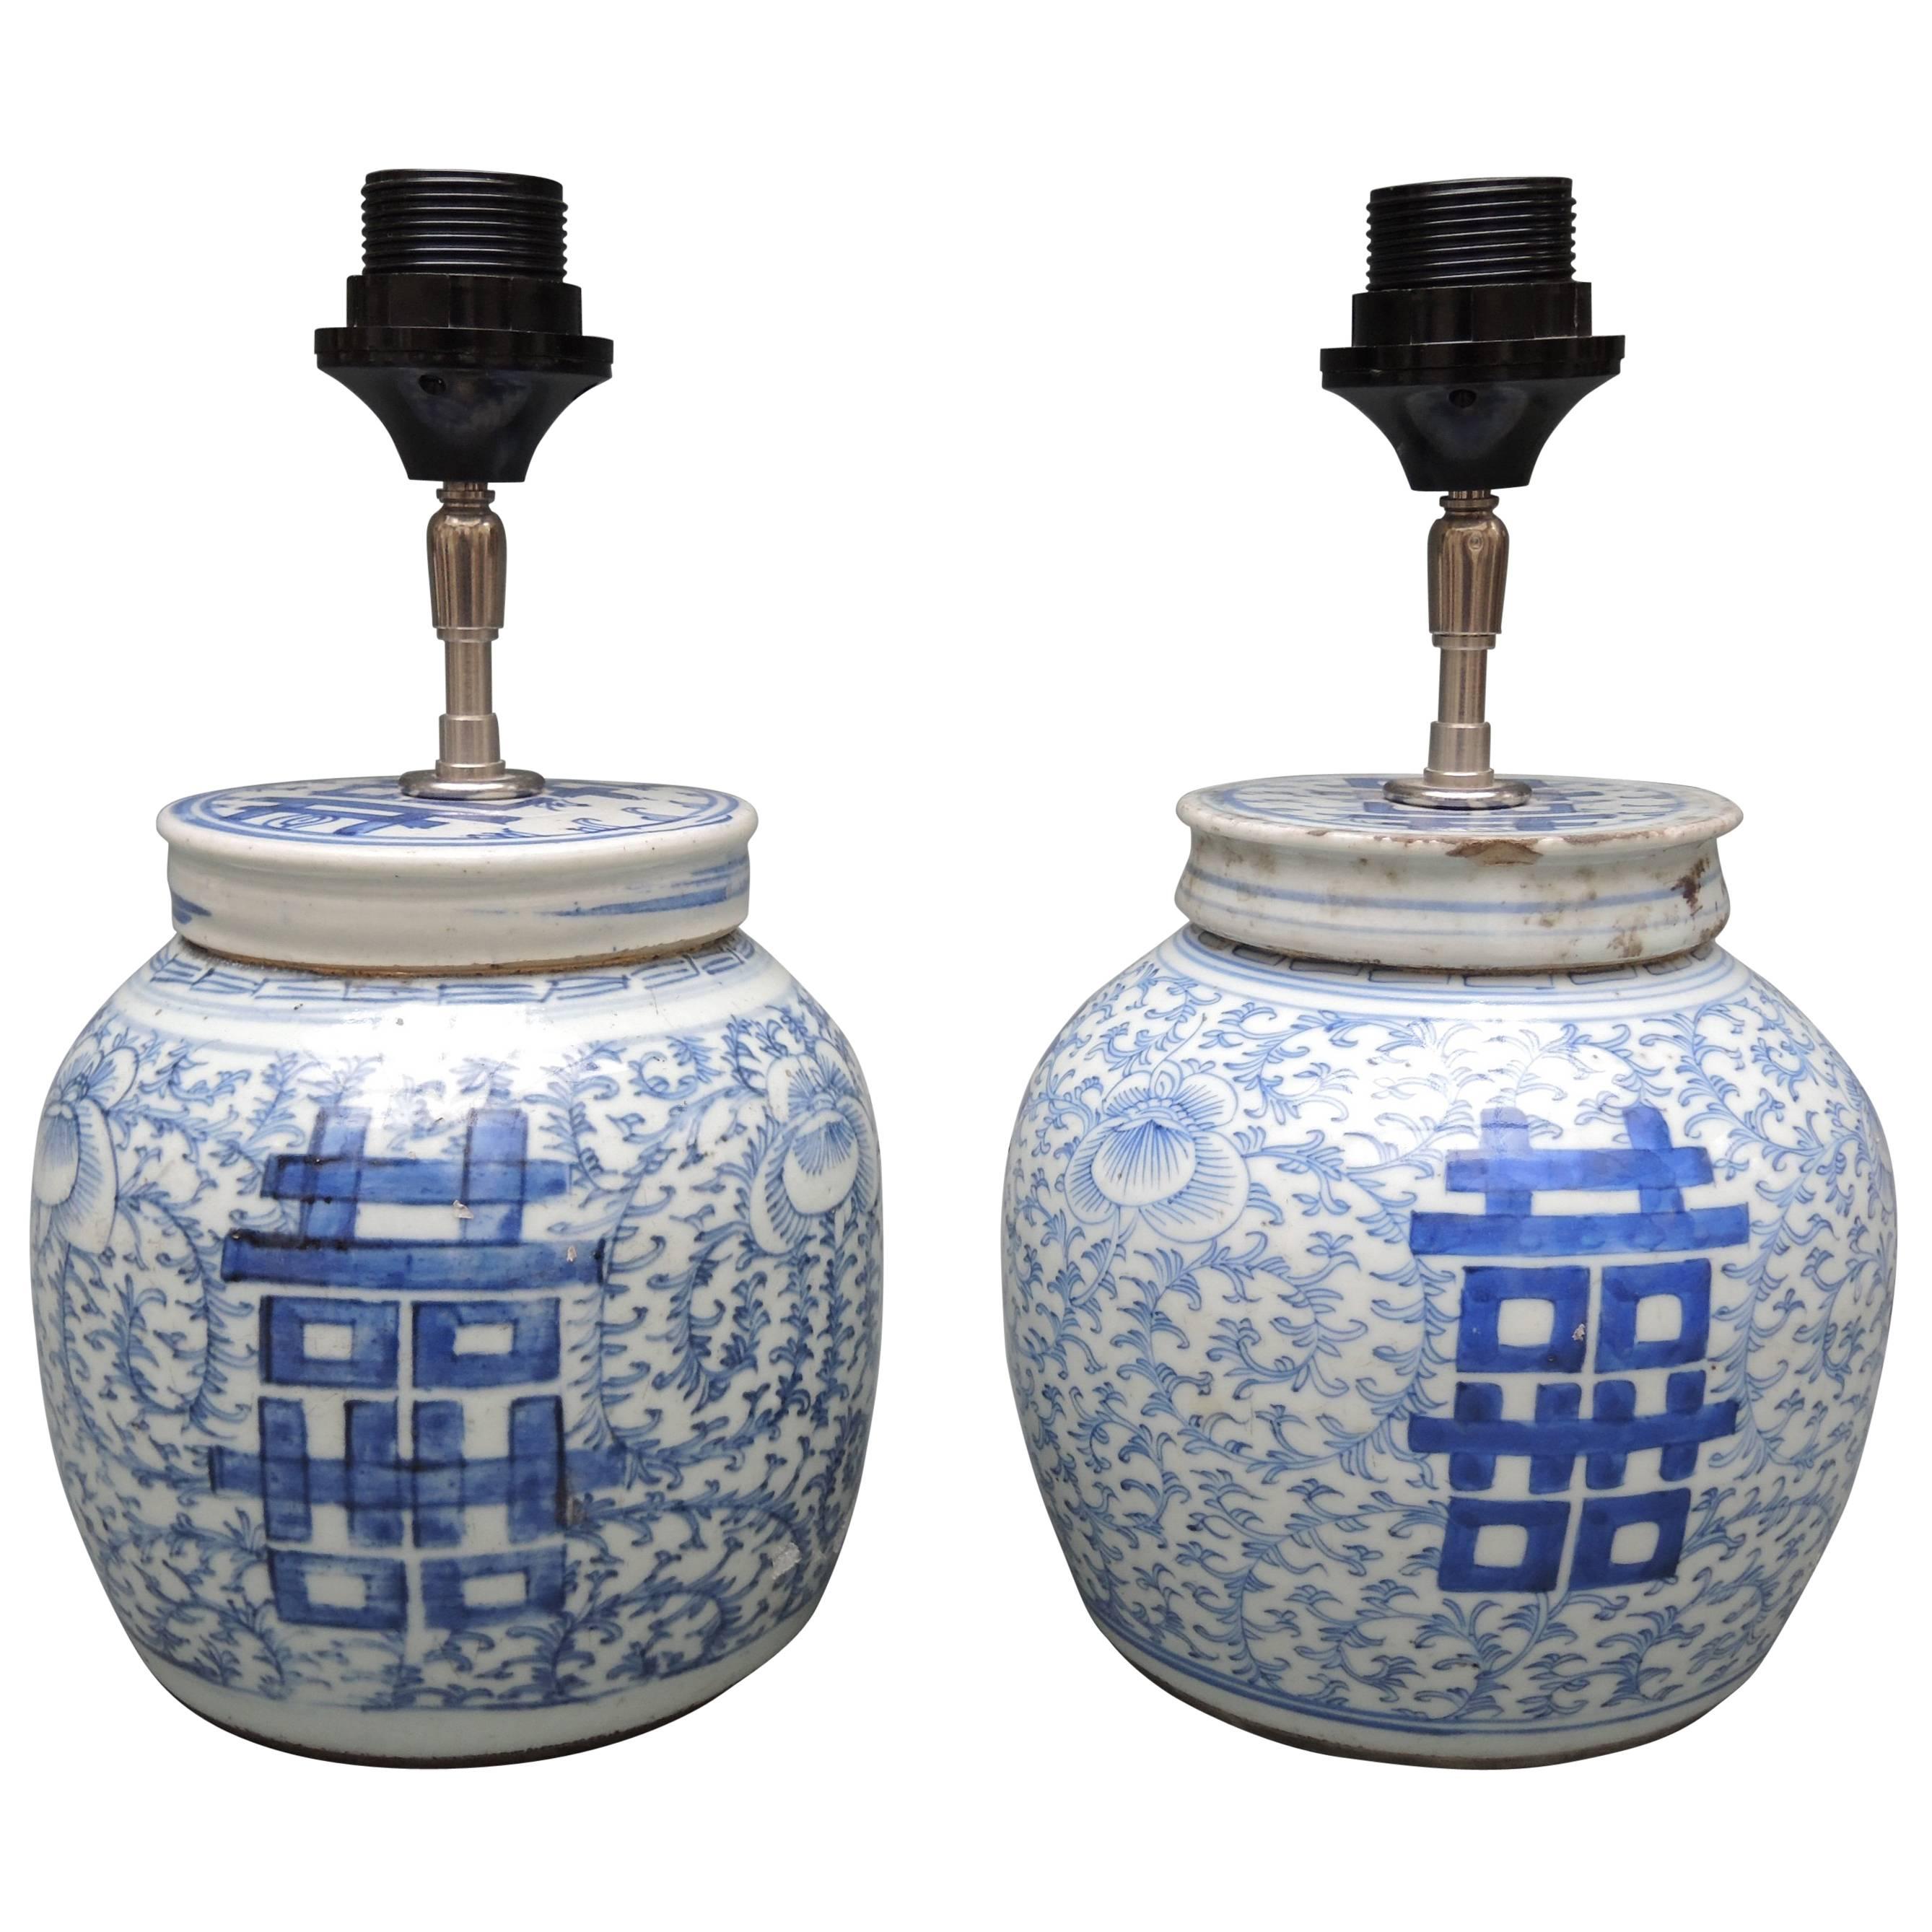 Pair of Antique Chinese Blue and White Porcelain Ginger Jar Lamps